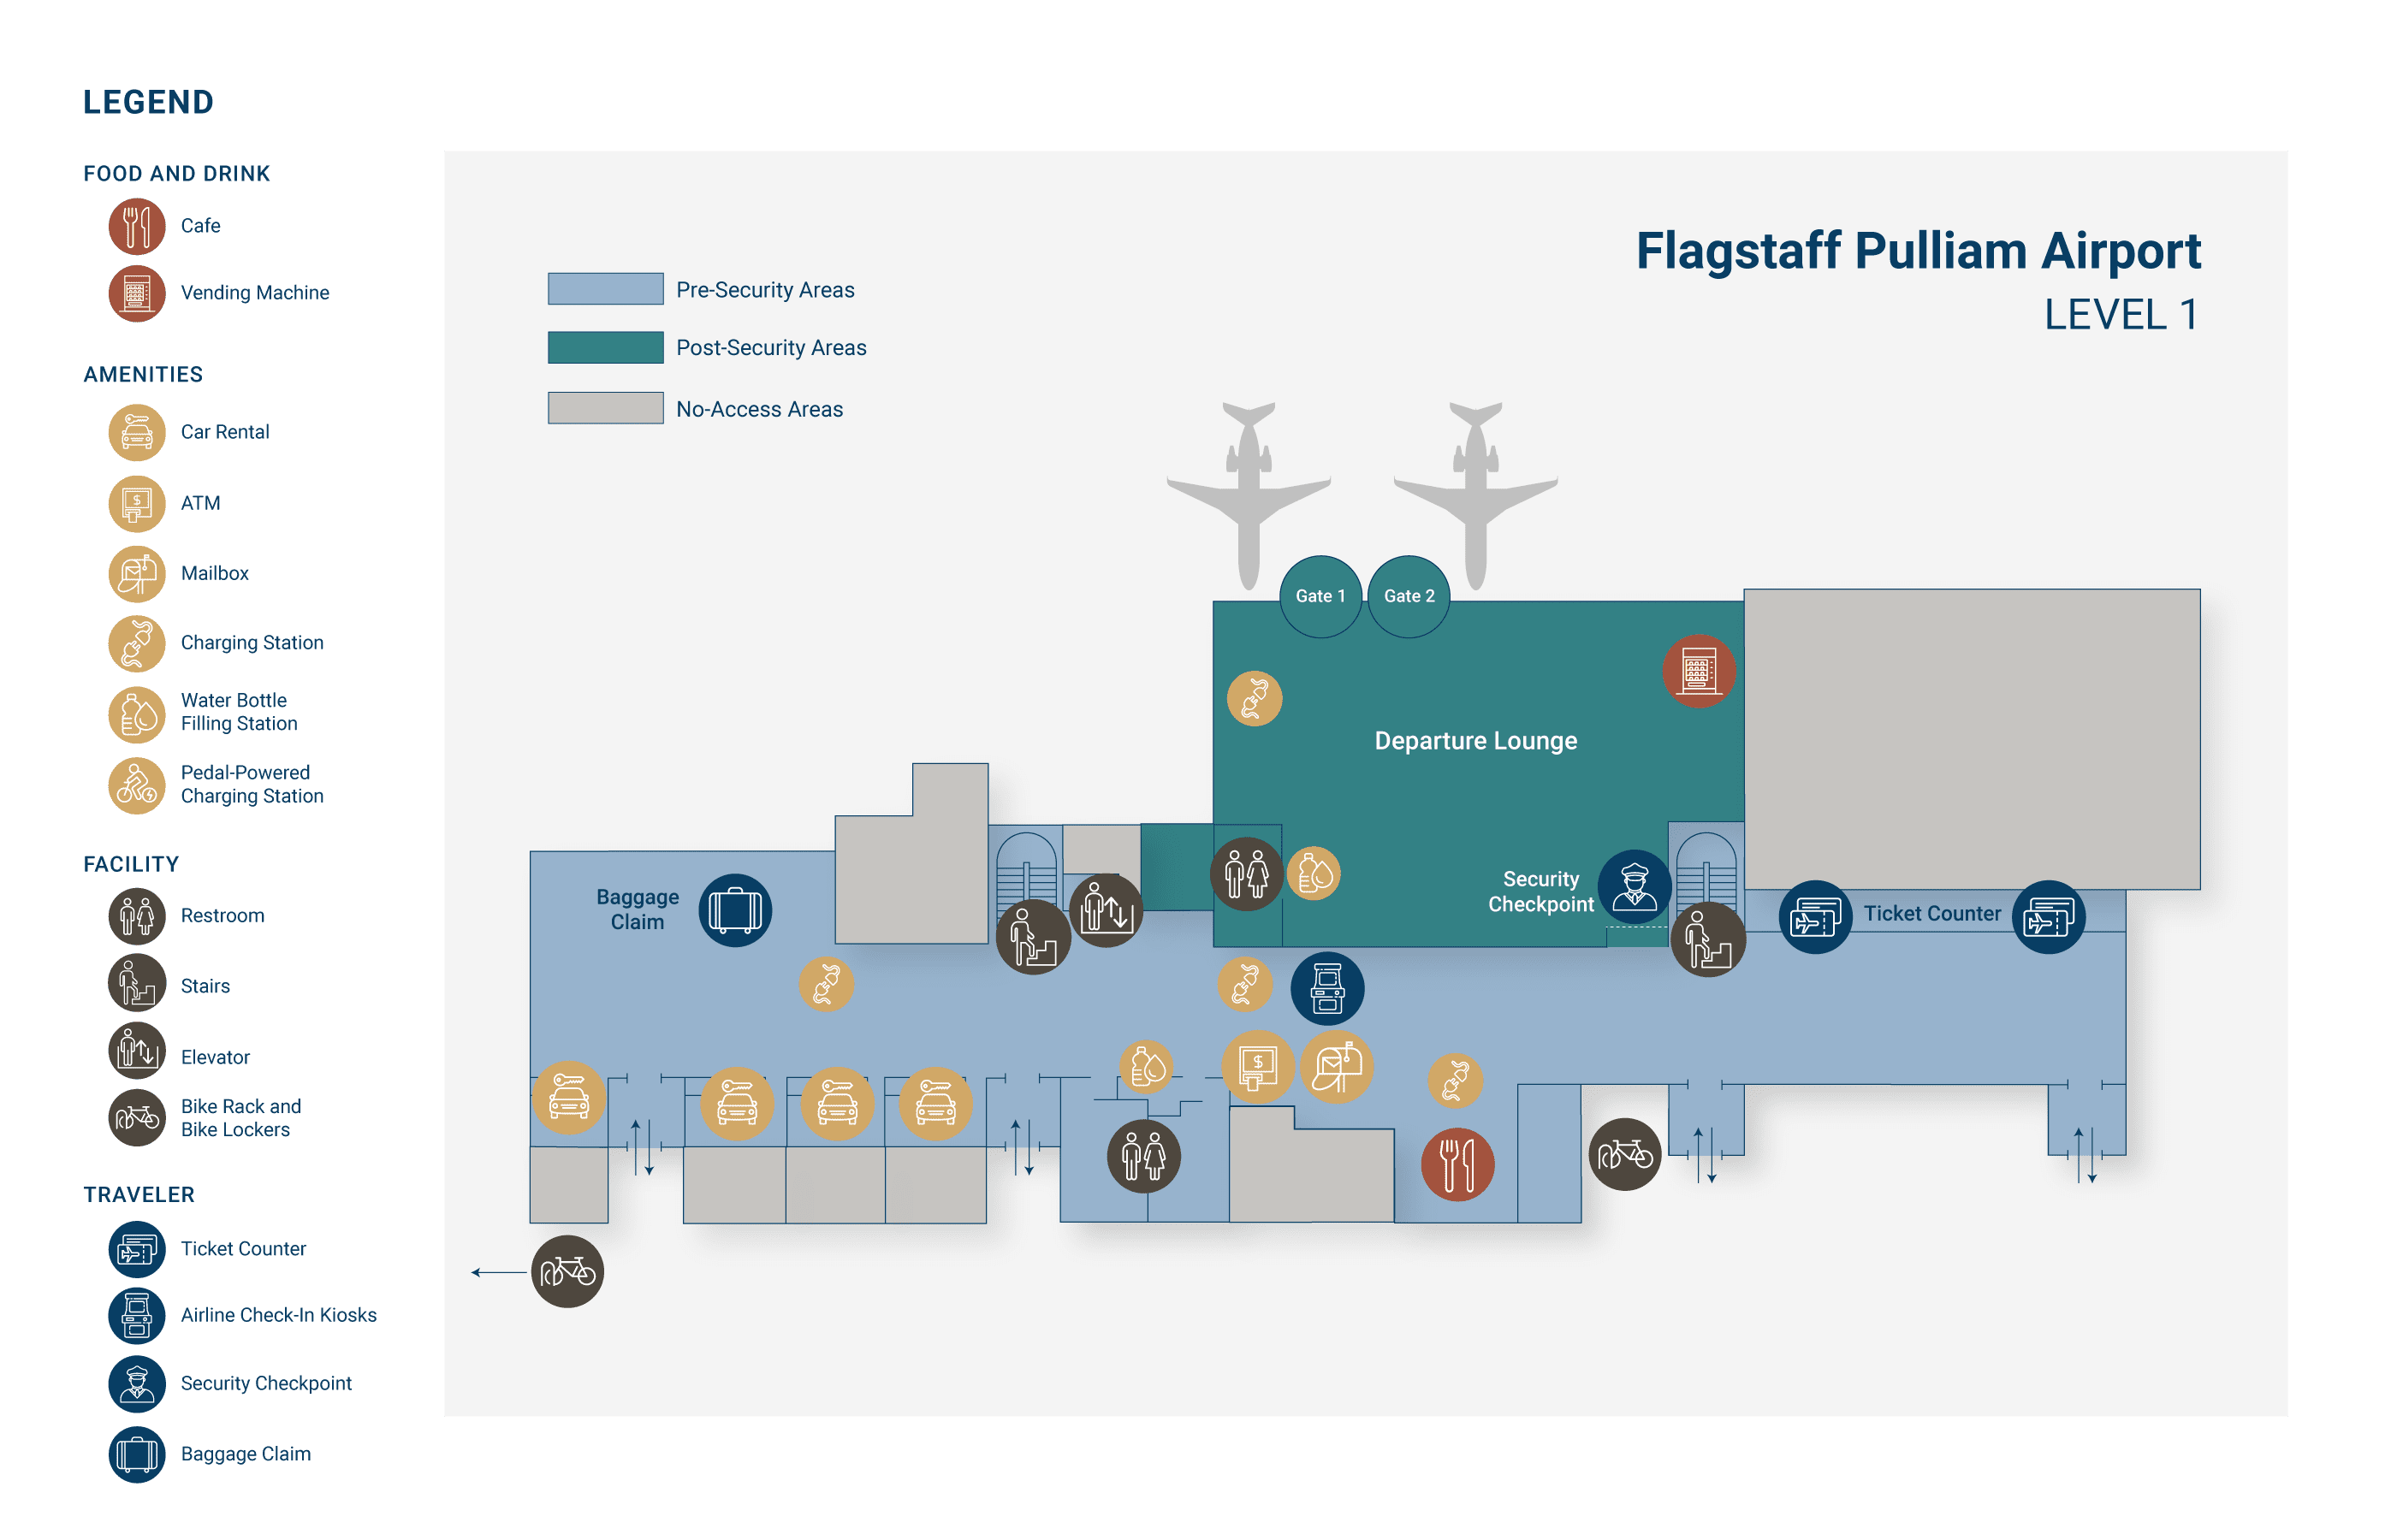 FLG Airport Terminal Map, first floor